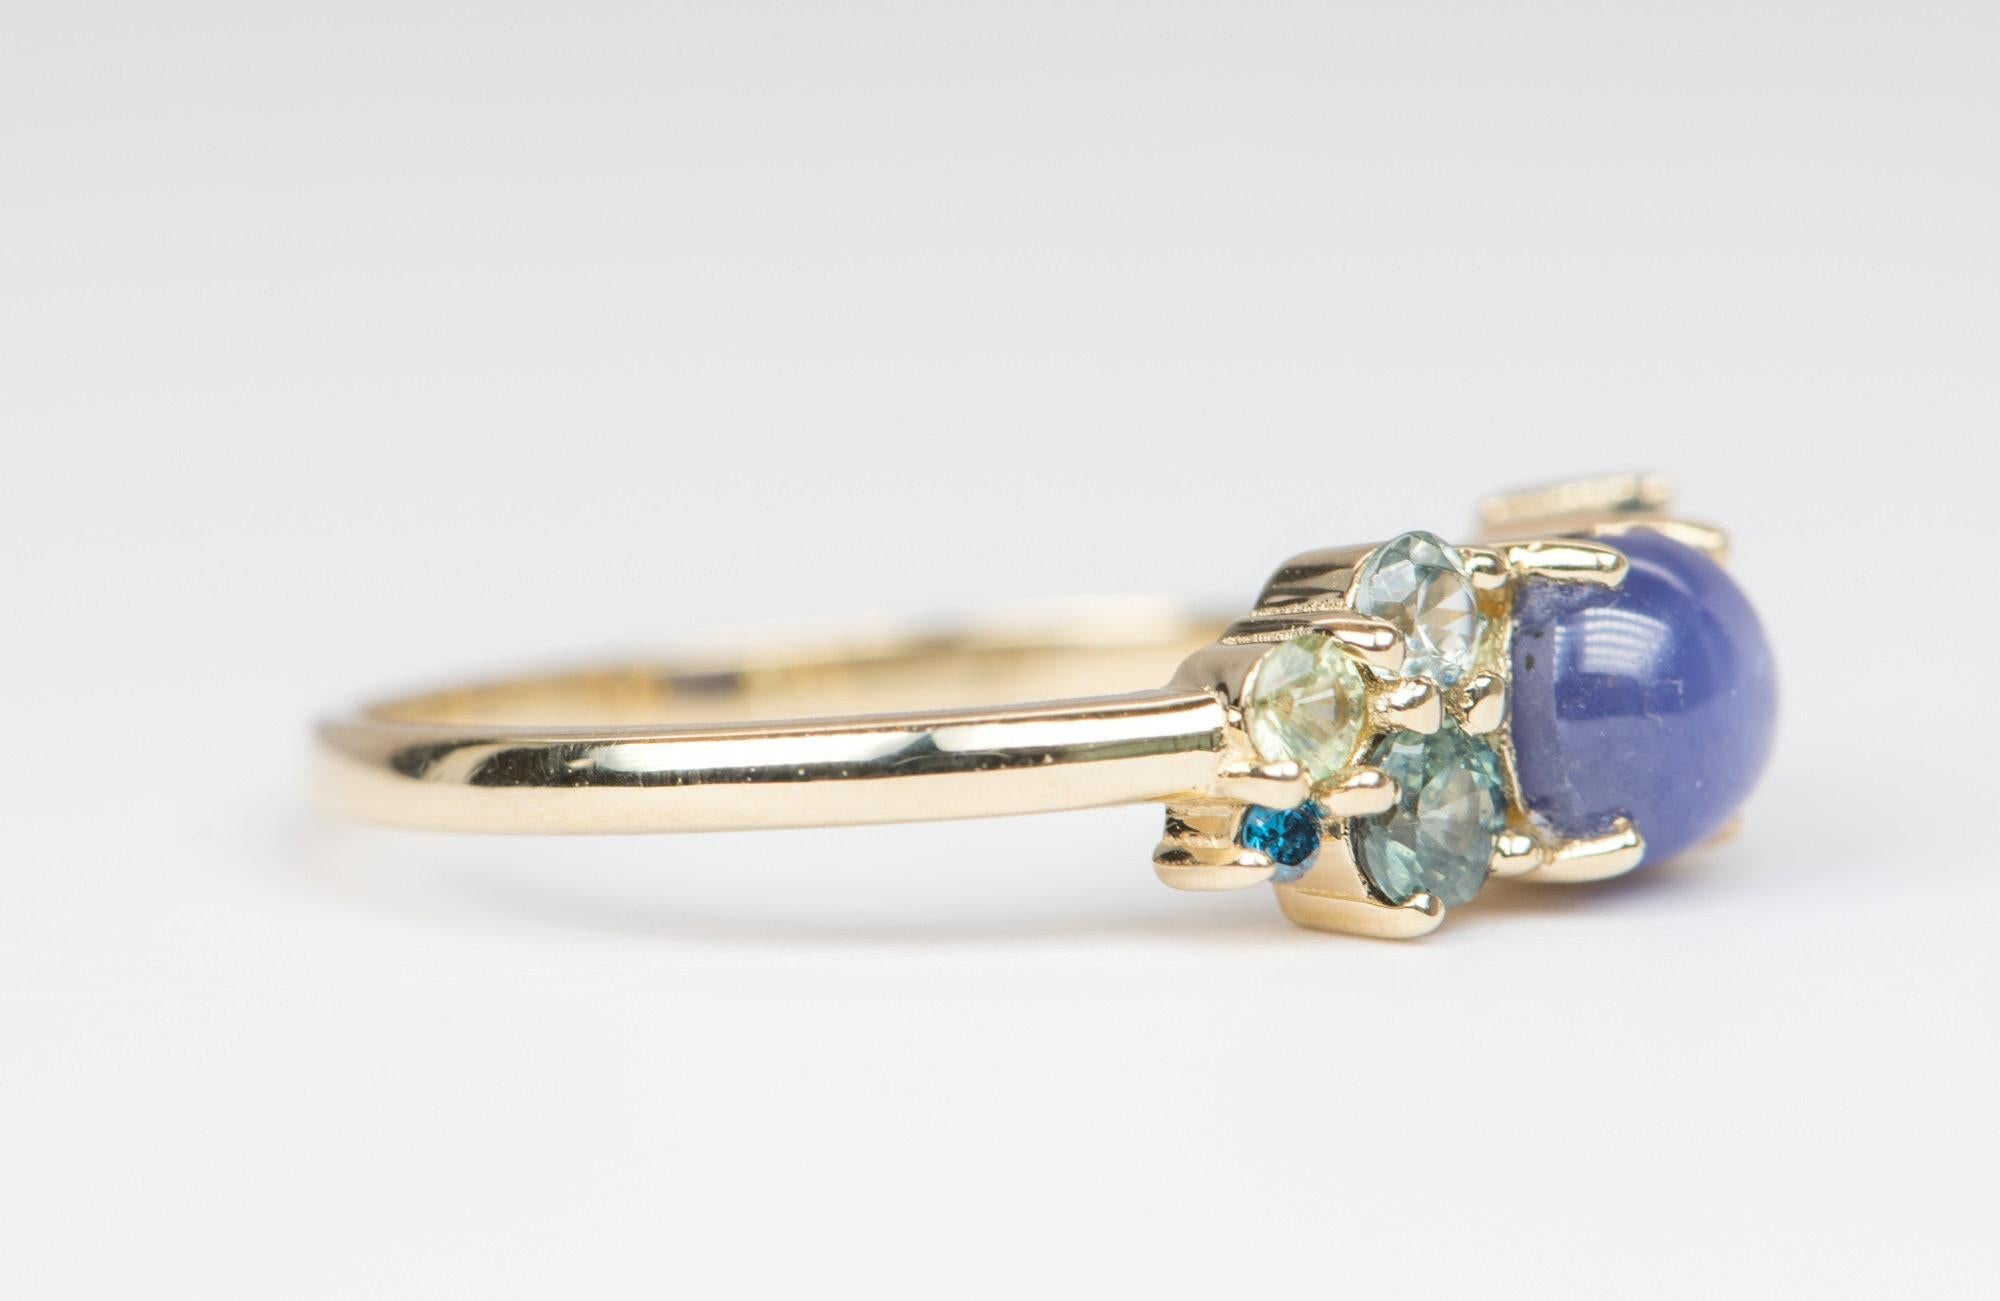 ♥  A solid 14k yellow gold ring set with a oval shaped natural un-heated cabochon star sapphire in the center, flanked by a cluster of beautiful gemstones to complement the unique color in the center stone.
♥  The overall setting measures 15.5mm in